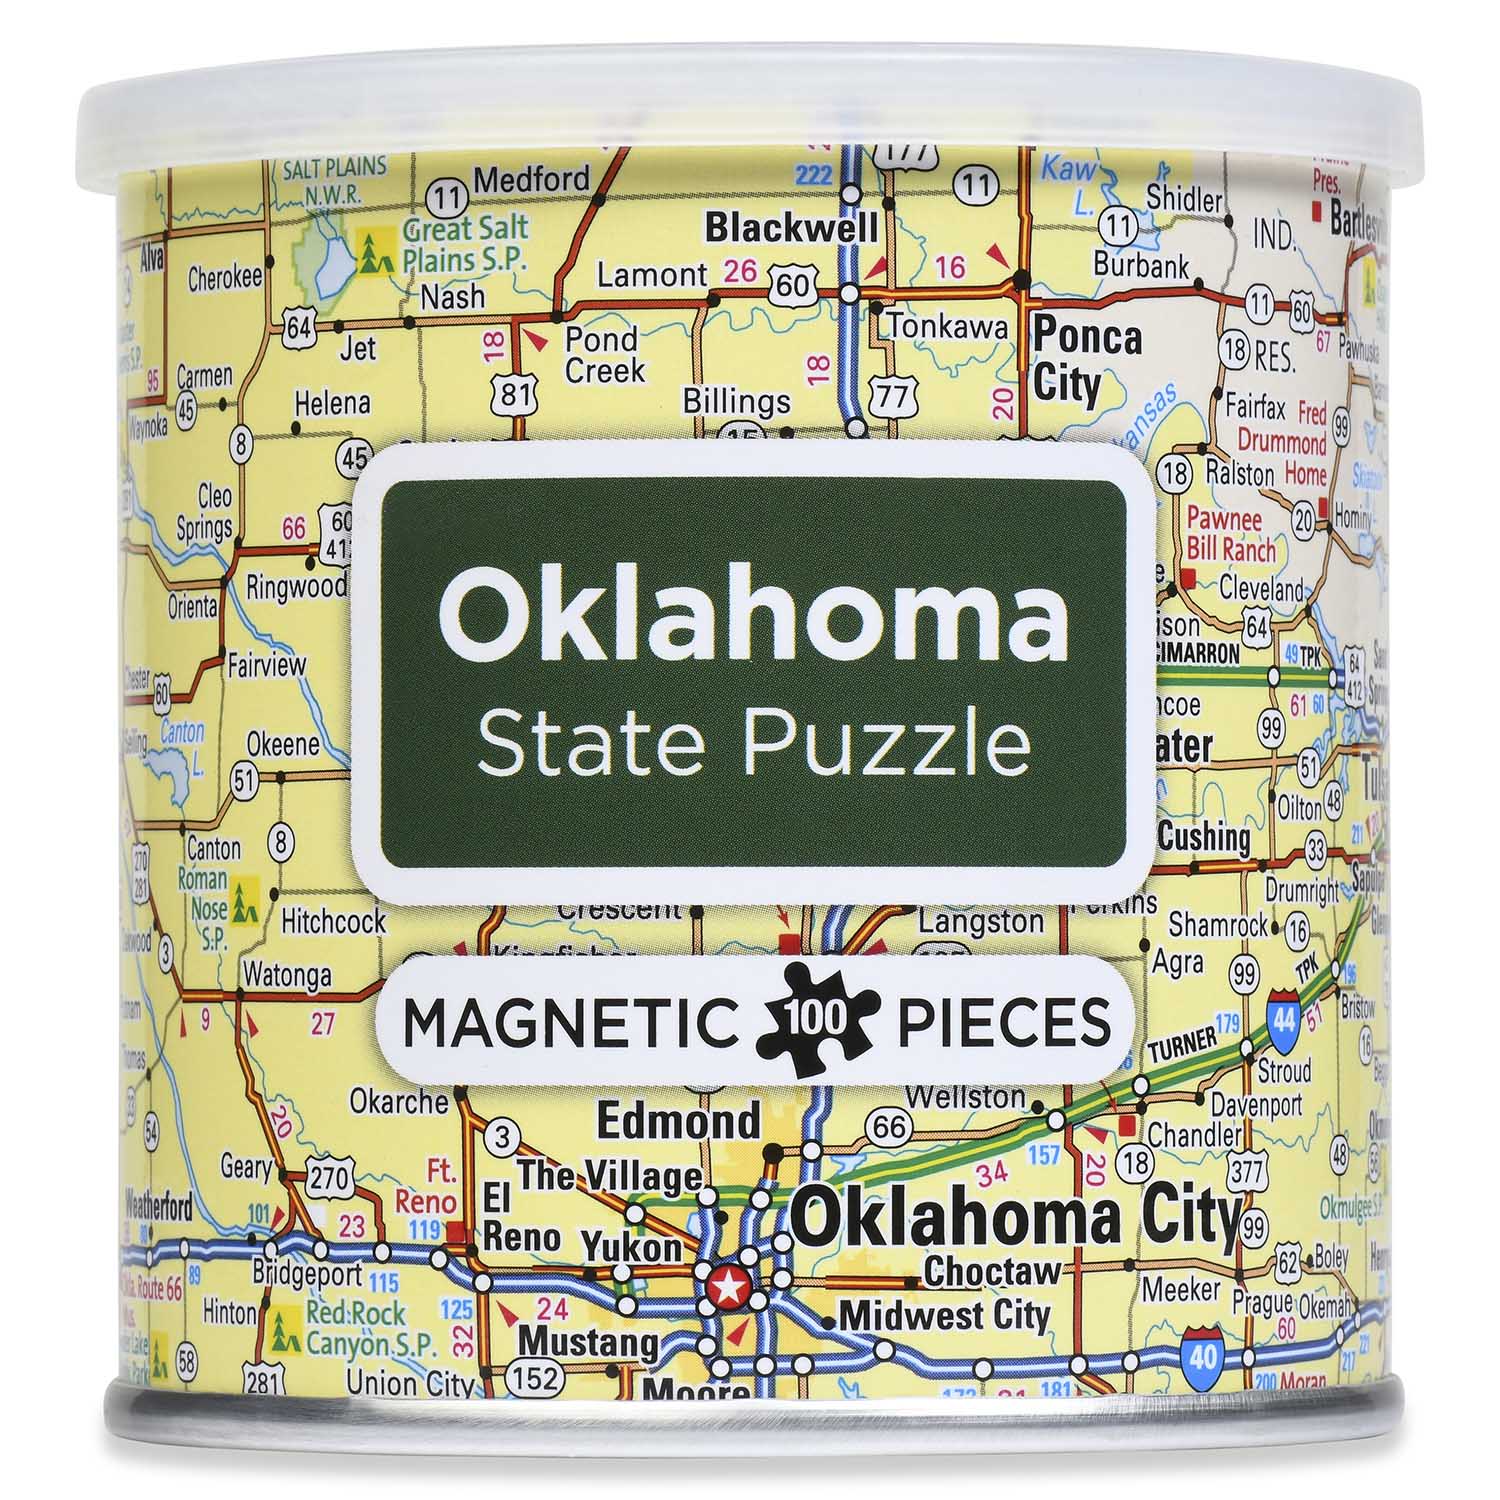 City Magnetic Puzzle Oklahoma Jigsaw Puzzle